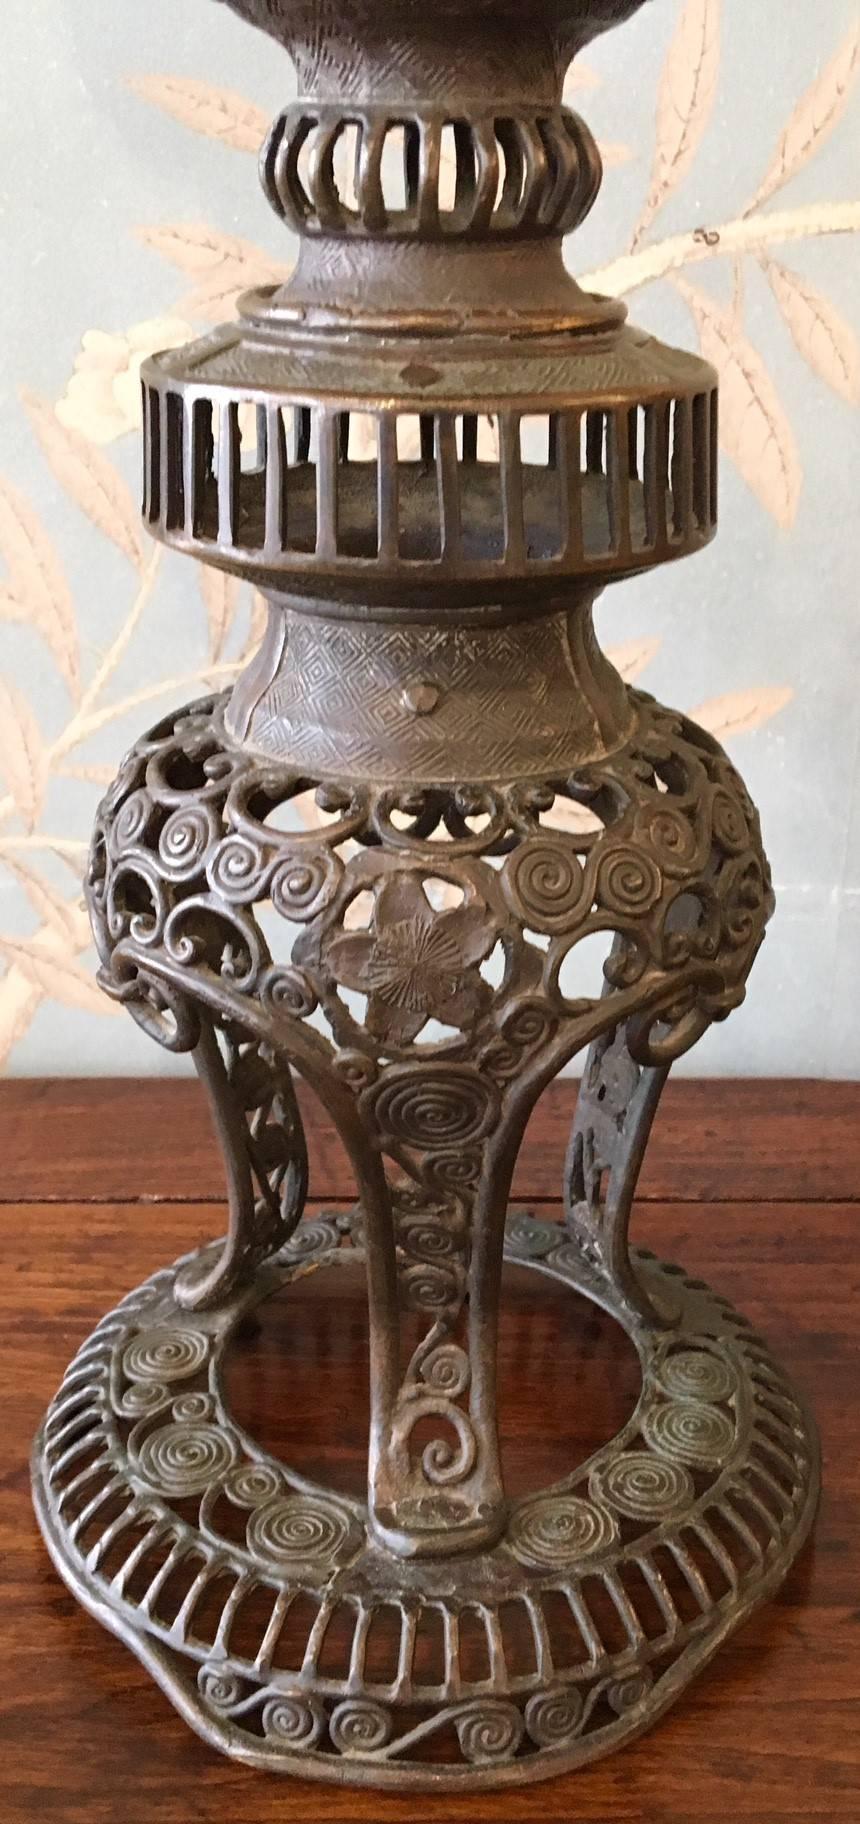 A pair of 19th century antique Japanese ornately decorated openwork metal candle stands.